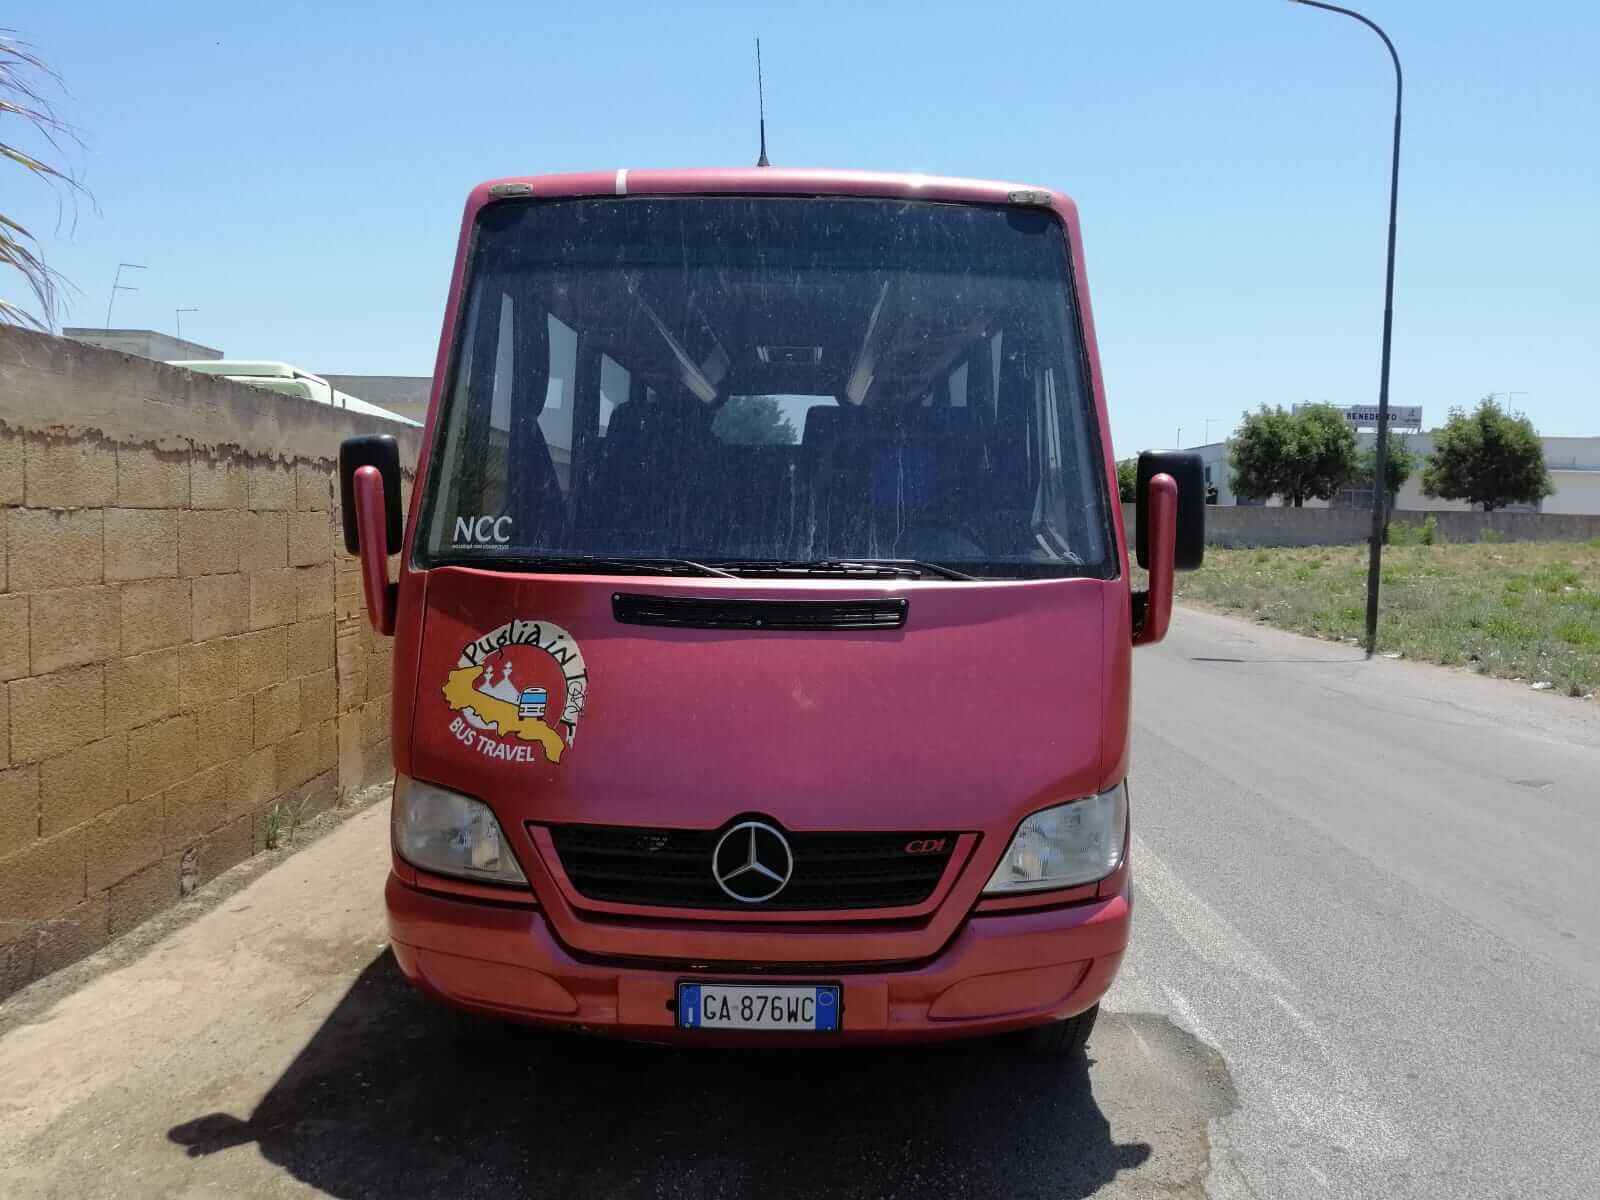 Hire a 19 seater Minibus  (Mercedes Daimlerchrysler ag mb 616 cdi/60 nc n 2003) from Puglia in tour bus travel s.r.l in Martina Franca  